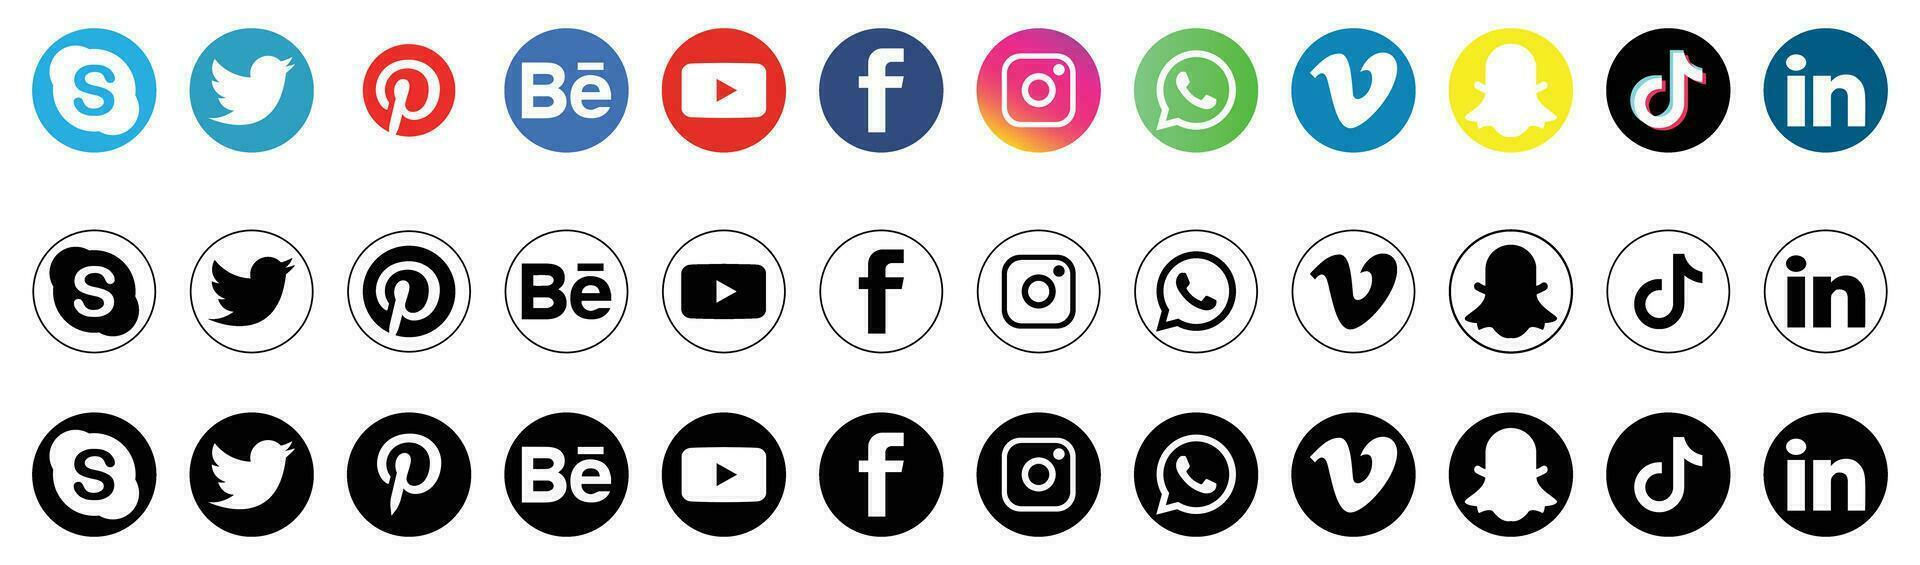 social media logo icons isolated on white vector